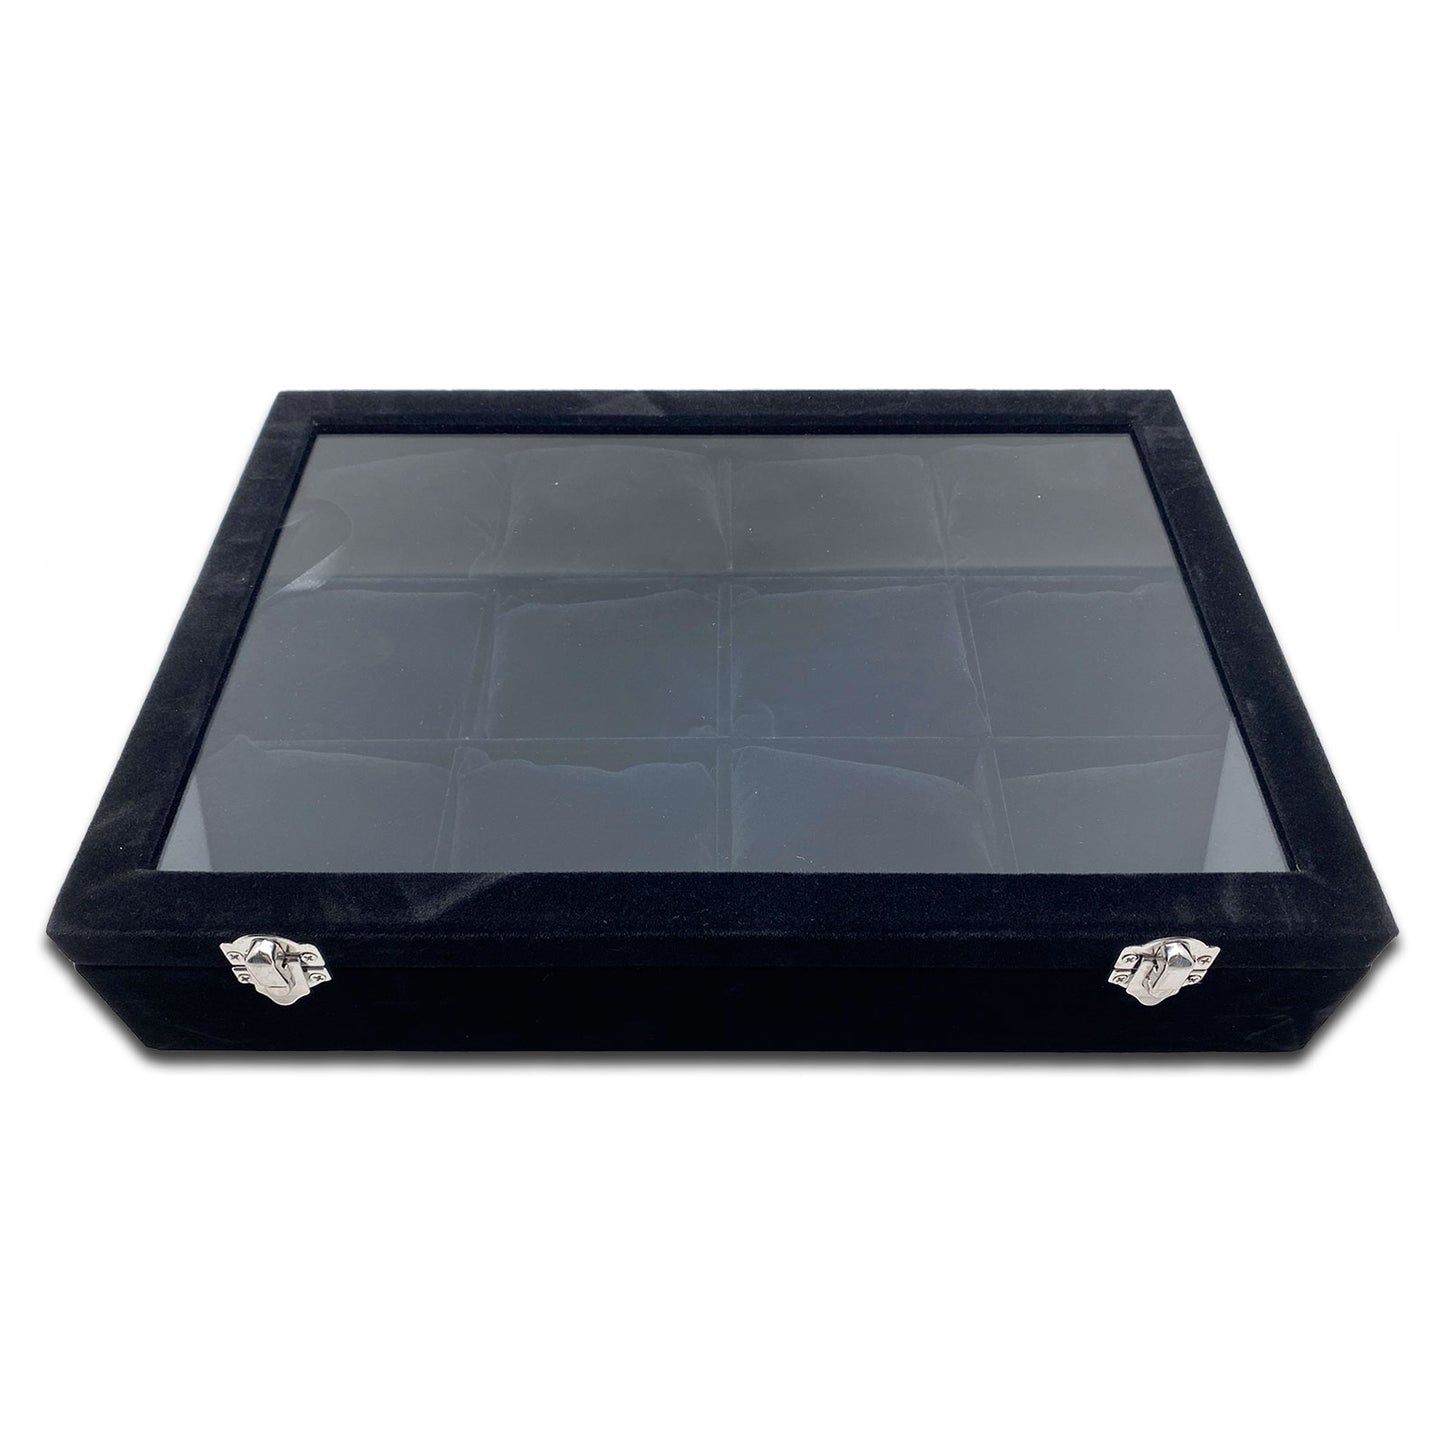 13 3/4" x 9 1/2" x 3" Glass Top Case with 12 Black Velvet Jewelry Display Pillows